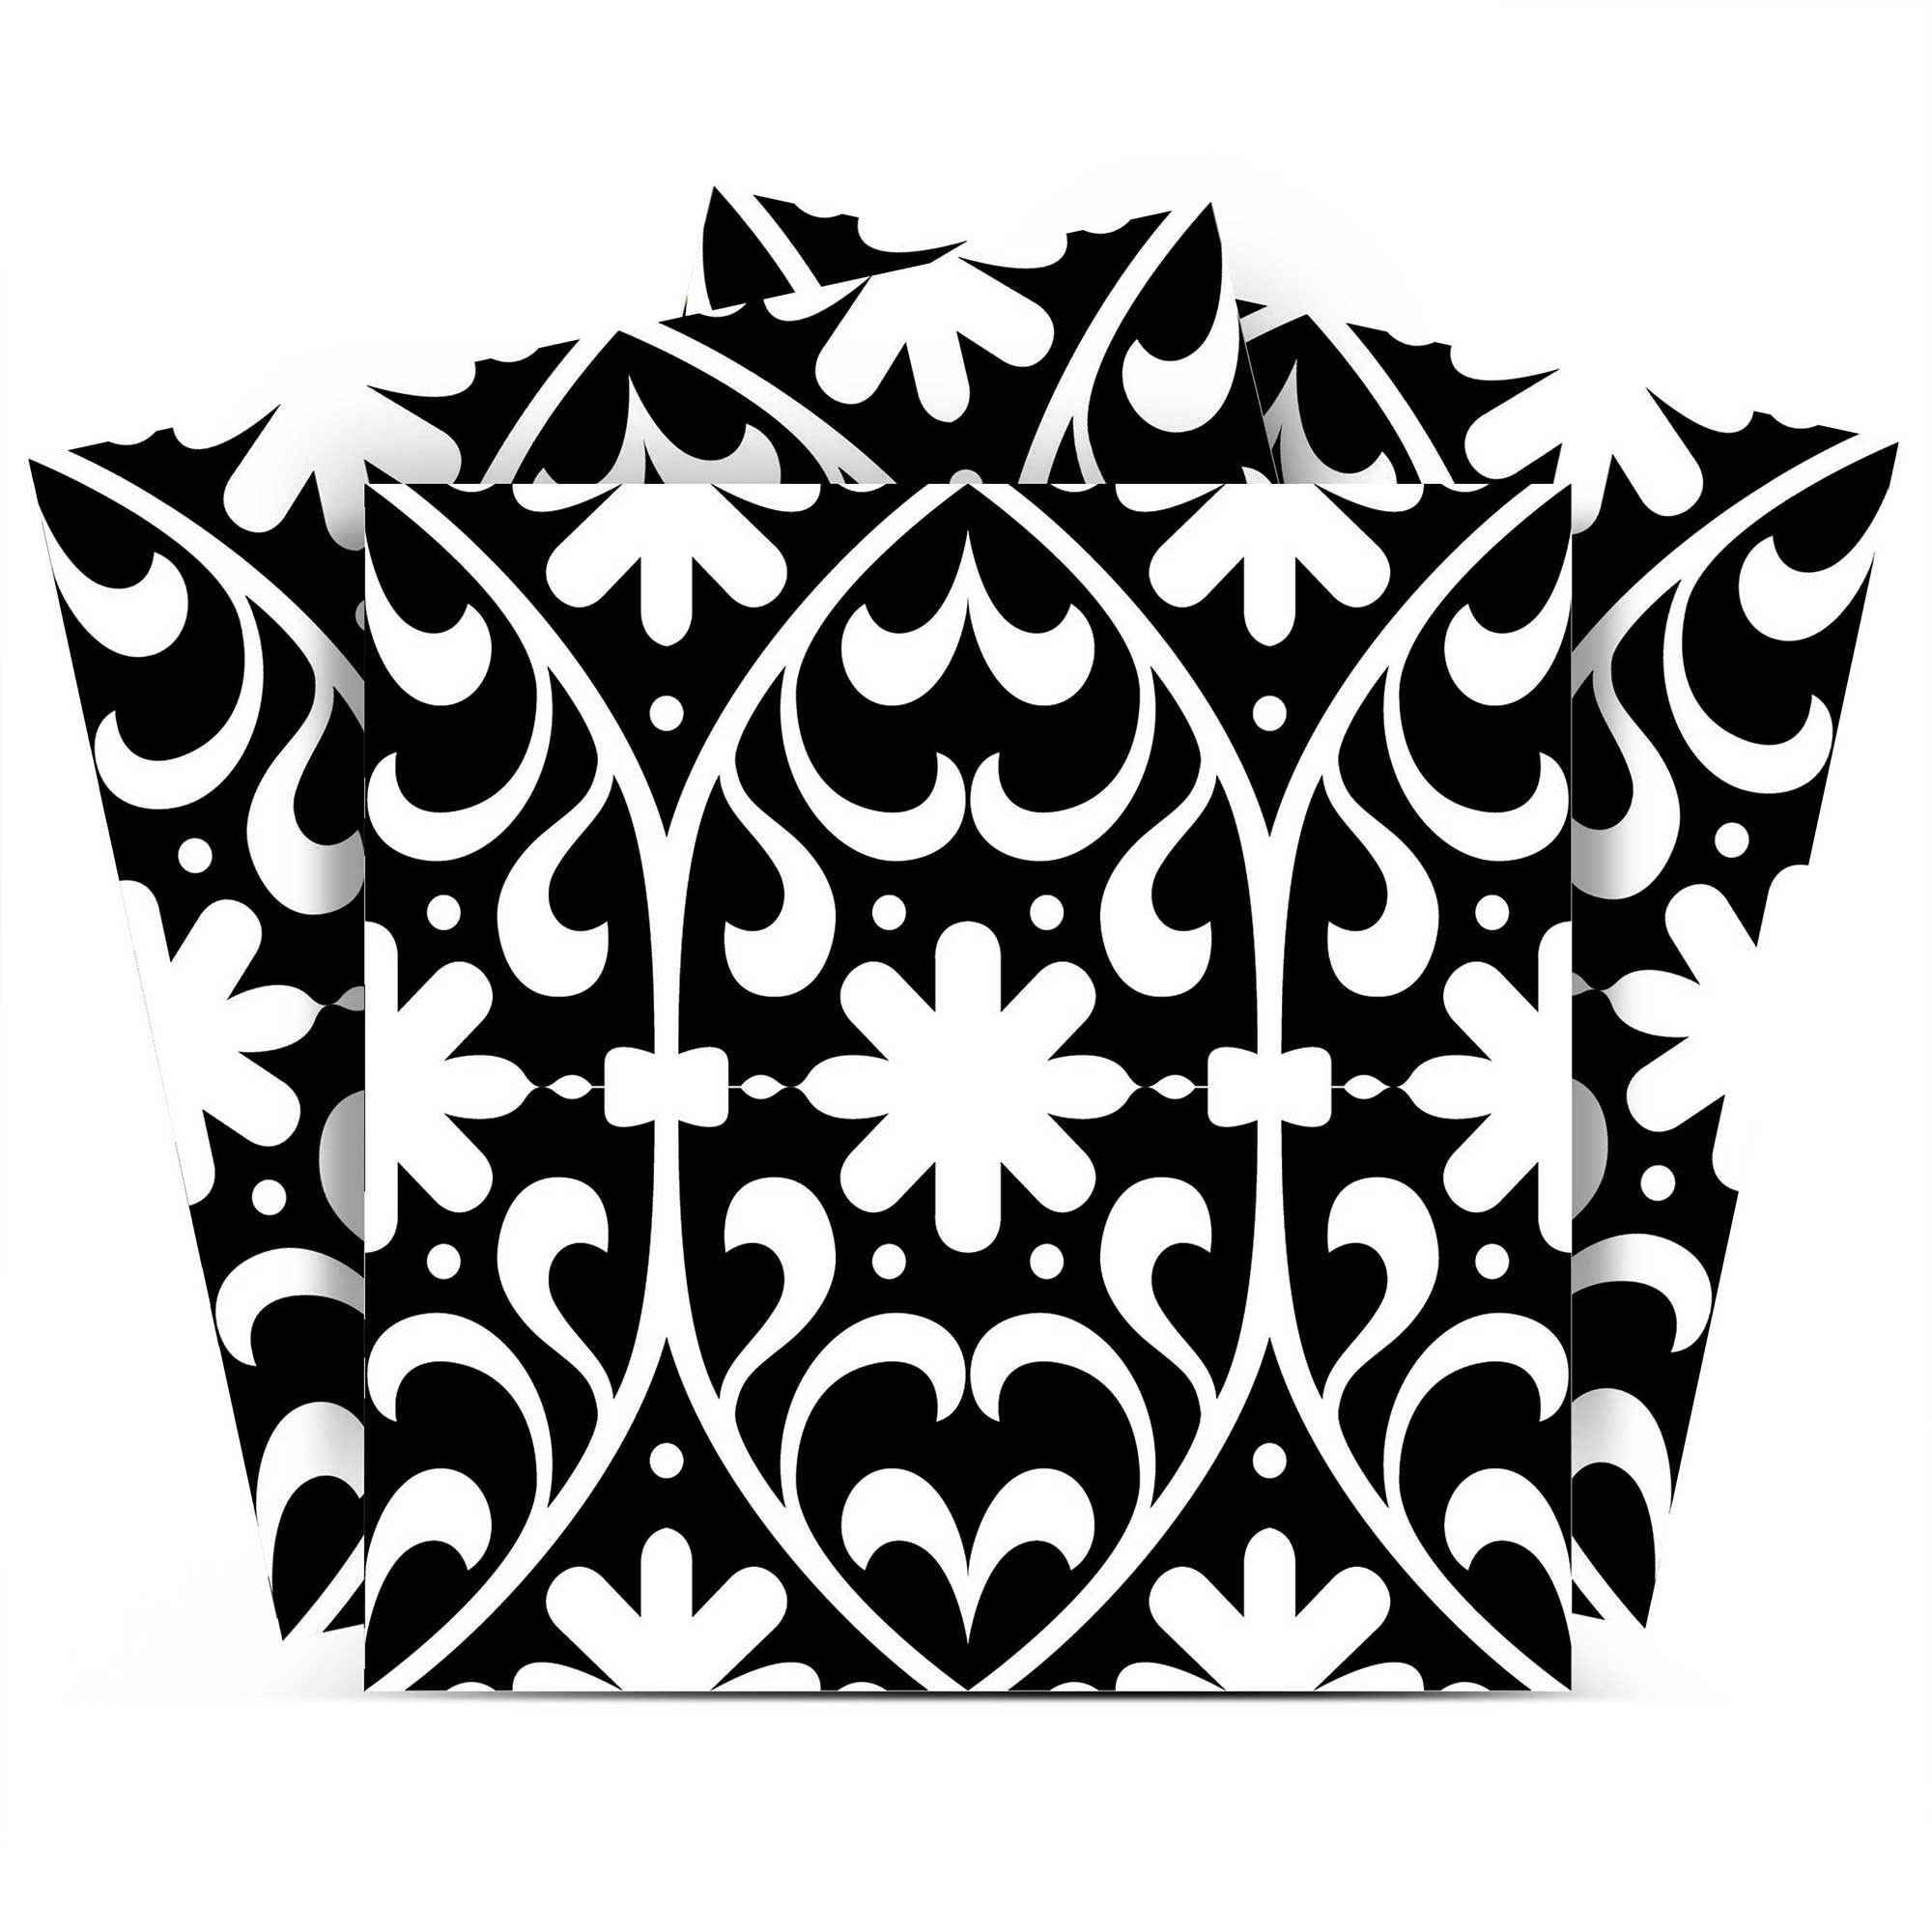 7" X 7" Black and White Floral Peel and Stick Removable Tiles-399878-1